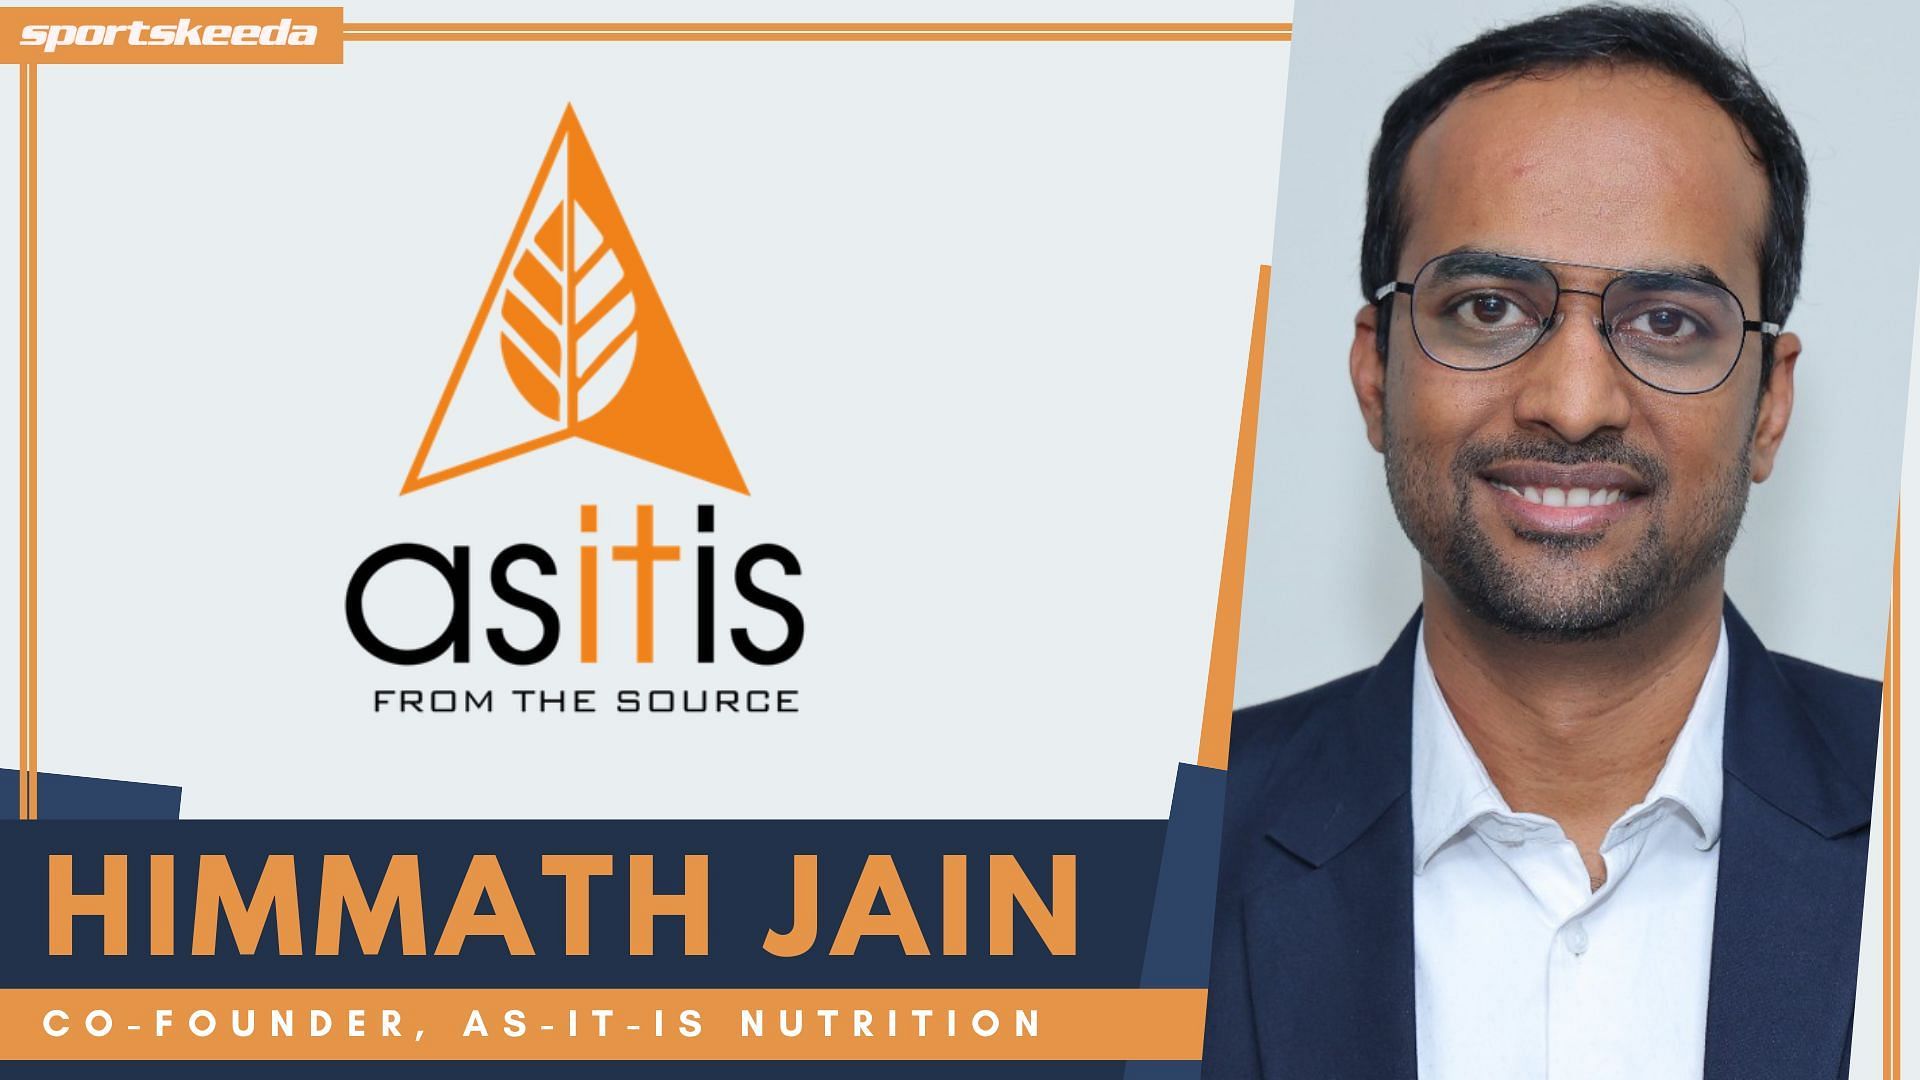 Himmat Jain, Co-founder, AS-IT-IS nutrition exclusively